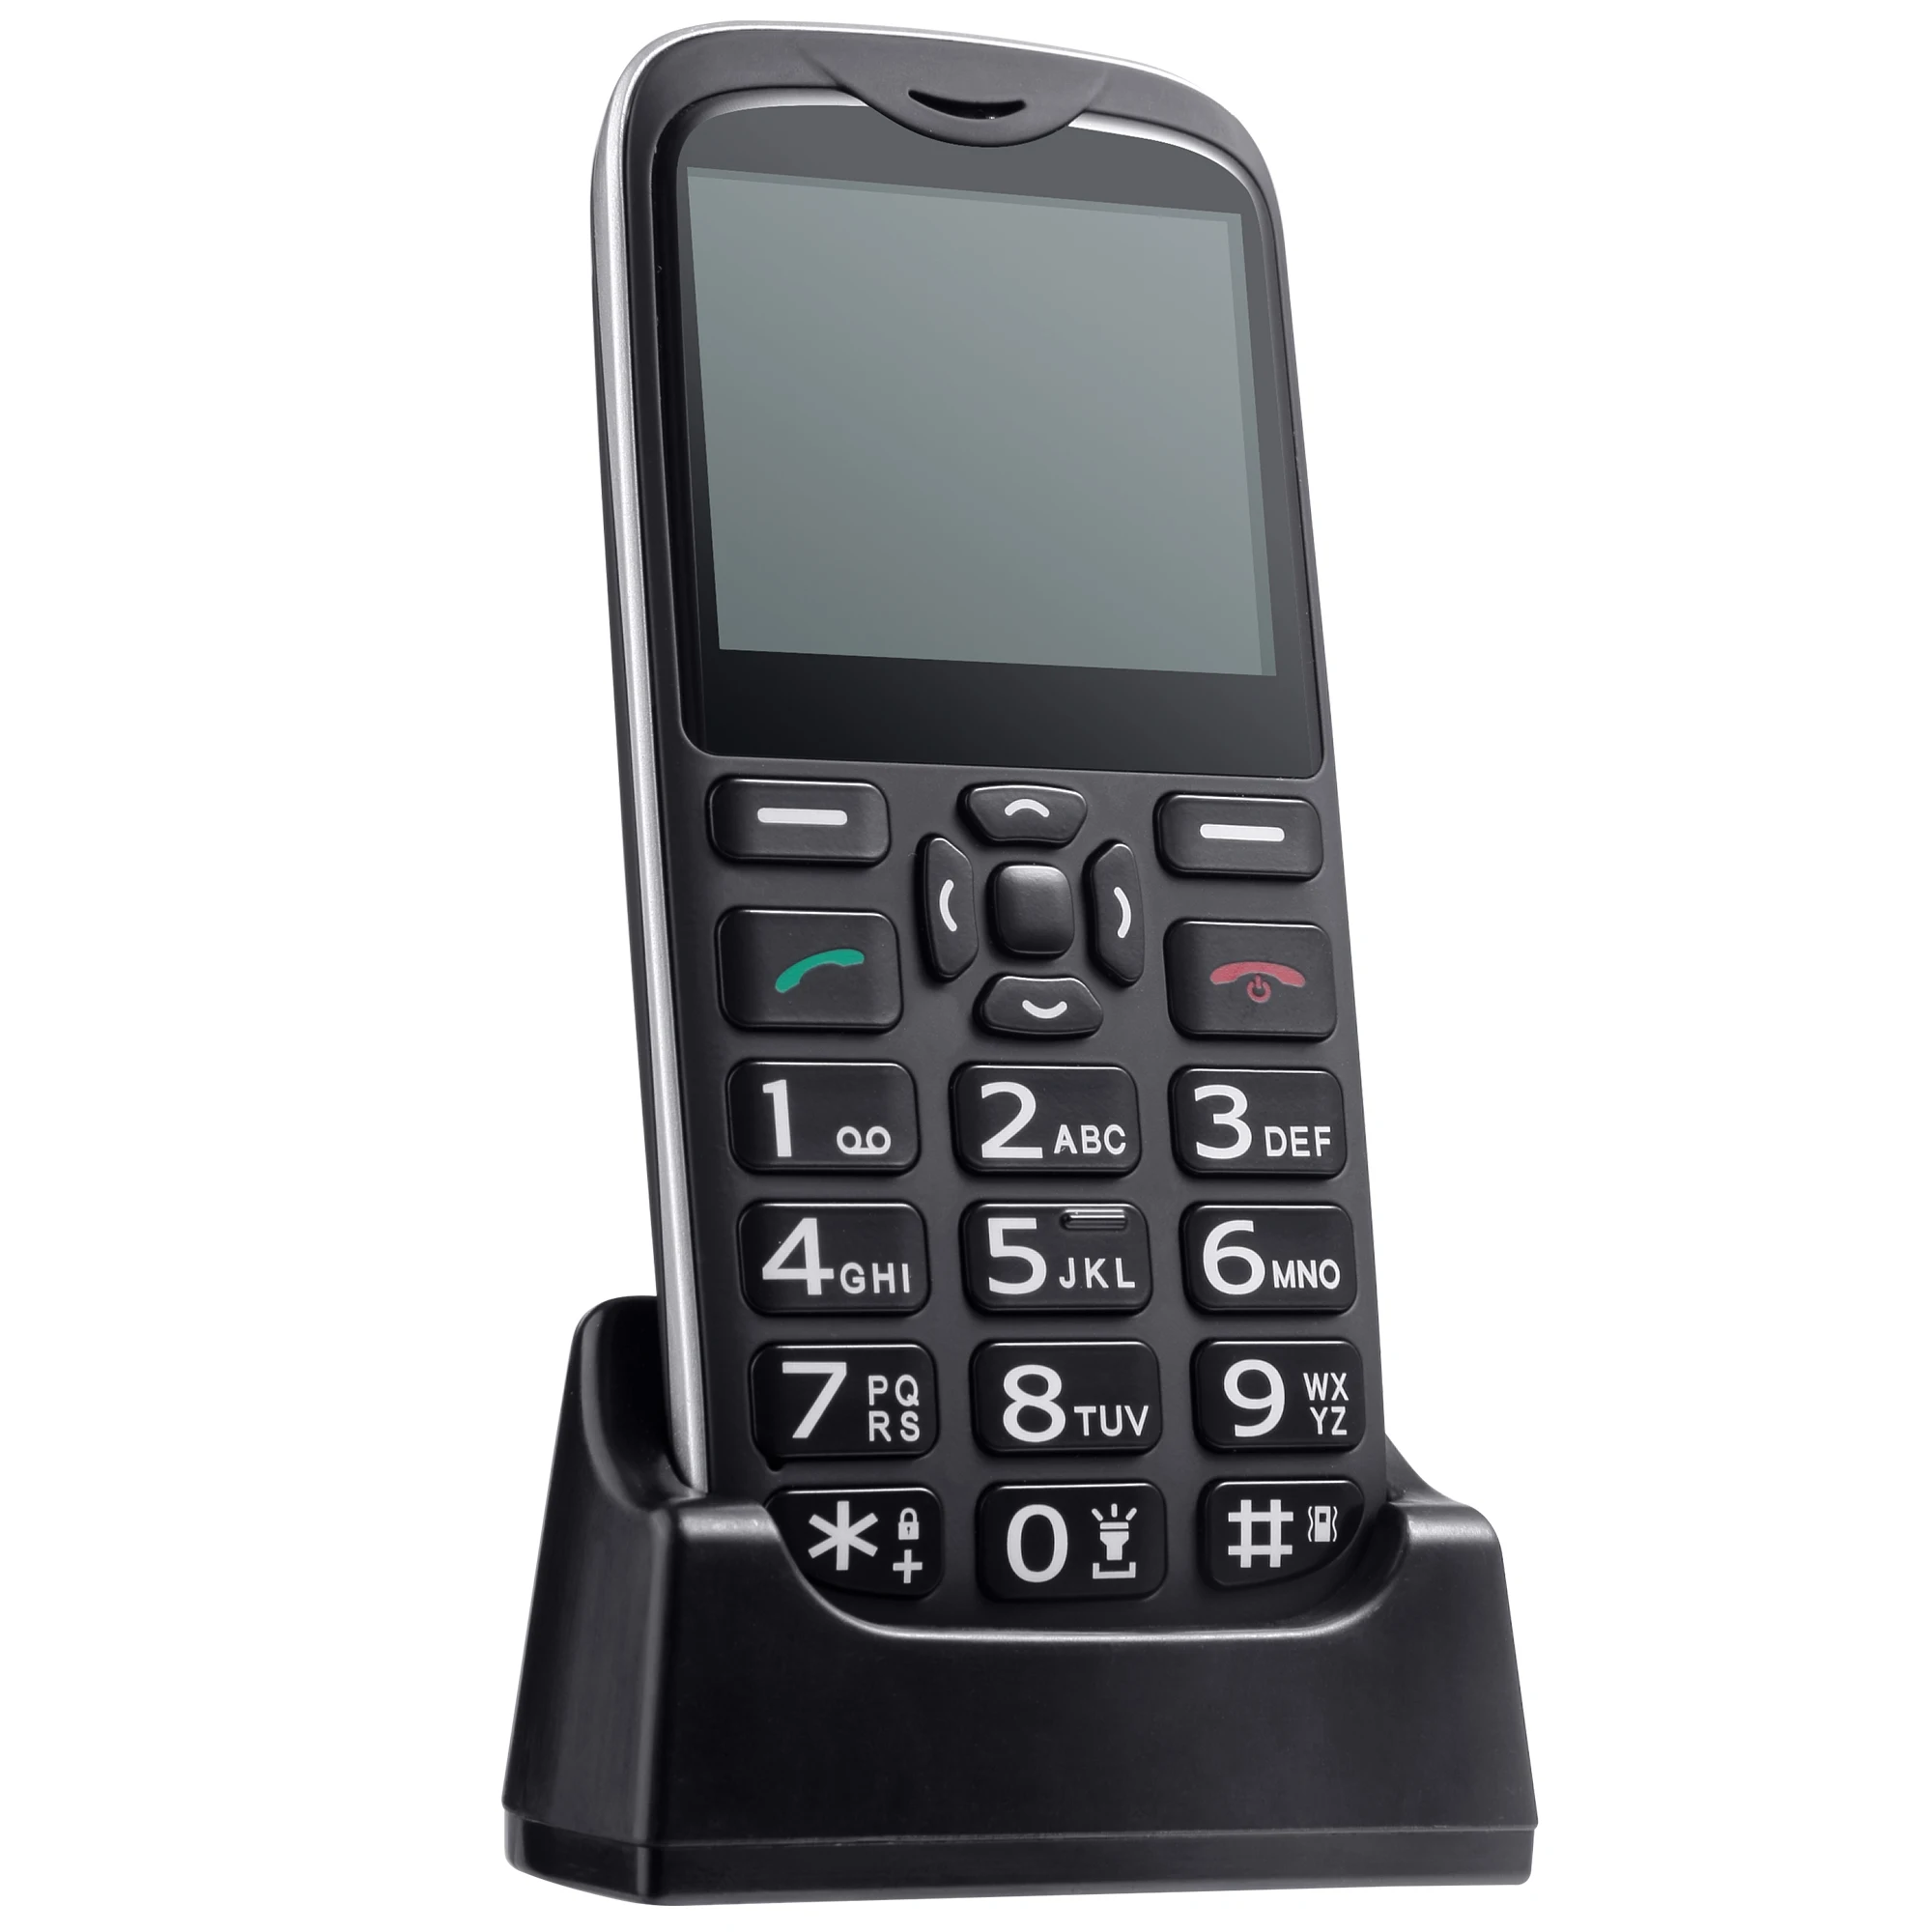 4G seniors mobile phone with SOS emergency button (as shown Other) 41